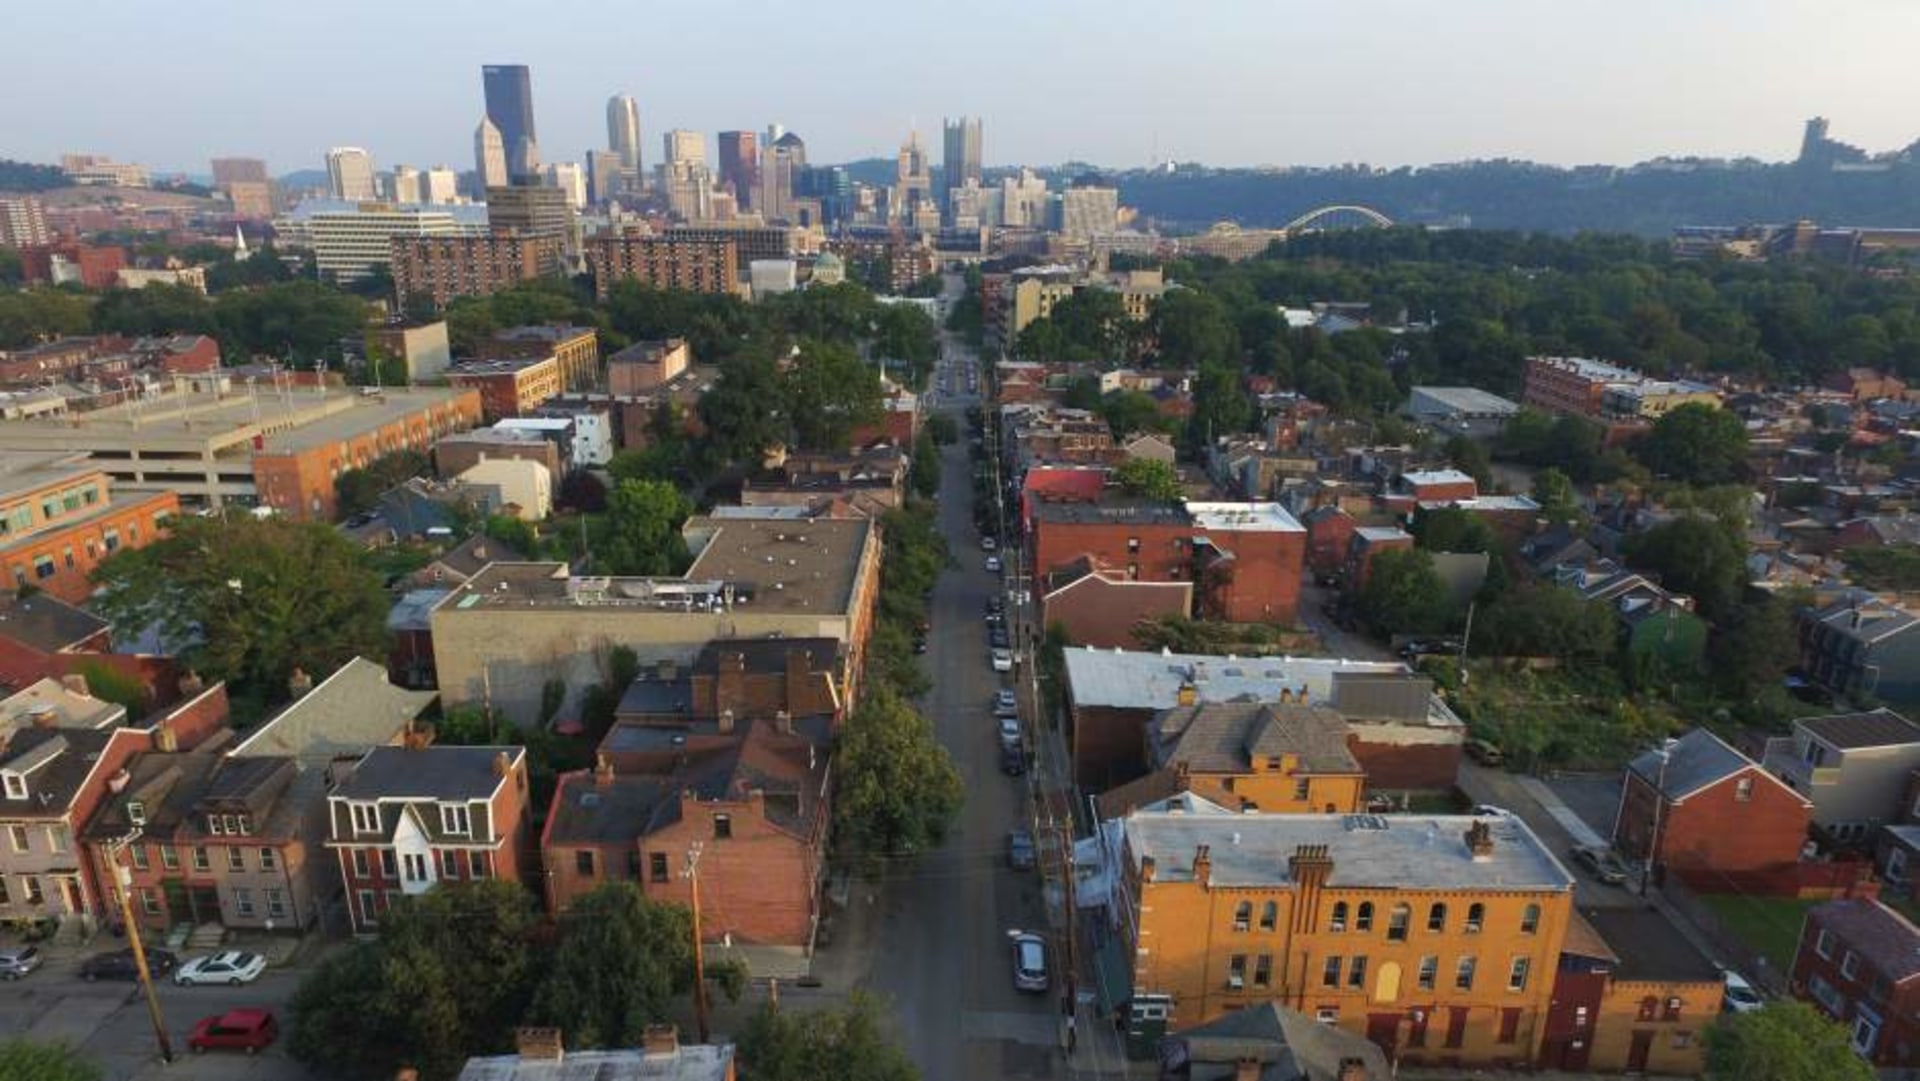 The Mexican War Streets, originally known as the &quot;Buena Vista Tract&quot;, is a historic district in the Central Northside neighborhood of Pittsburgh, Pennsylvania, in the United States. The district is densely filled with restored row houses, community gardens, and tree-lined streets and alleyways.